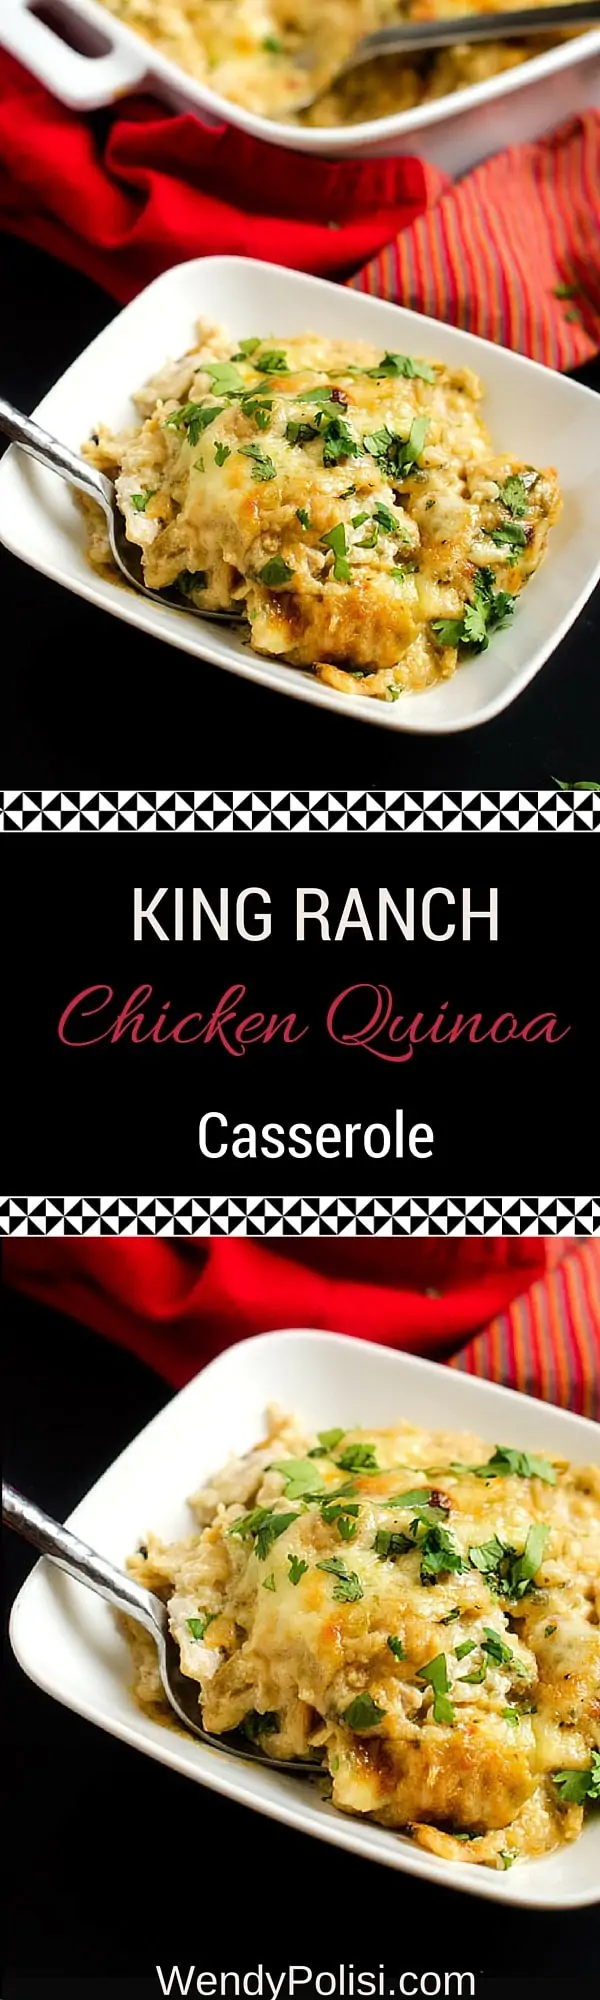 King Ranch Chicken Quinoa Casserole - This make ahead casserole recipe is easy and delicious! - WendyPolisi.com